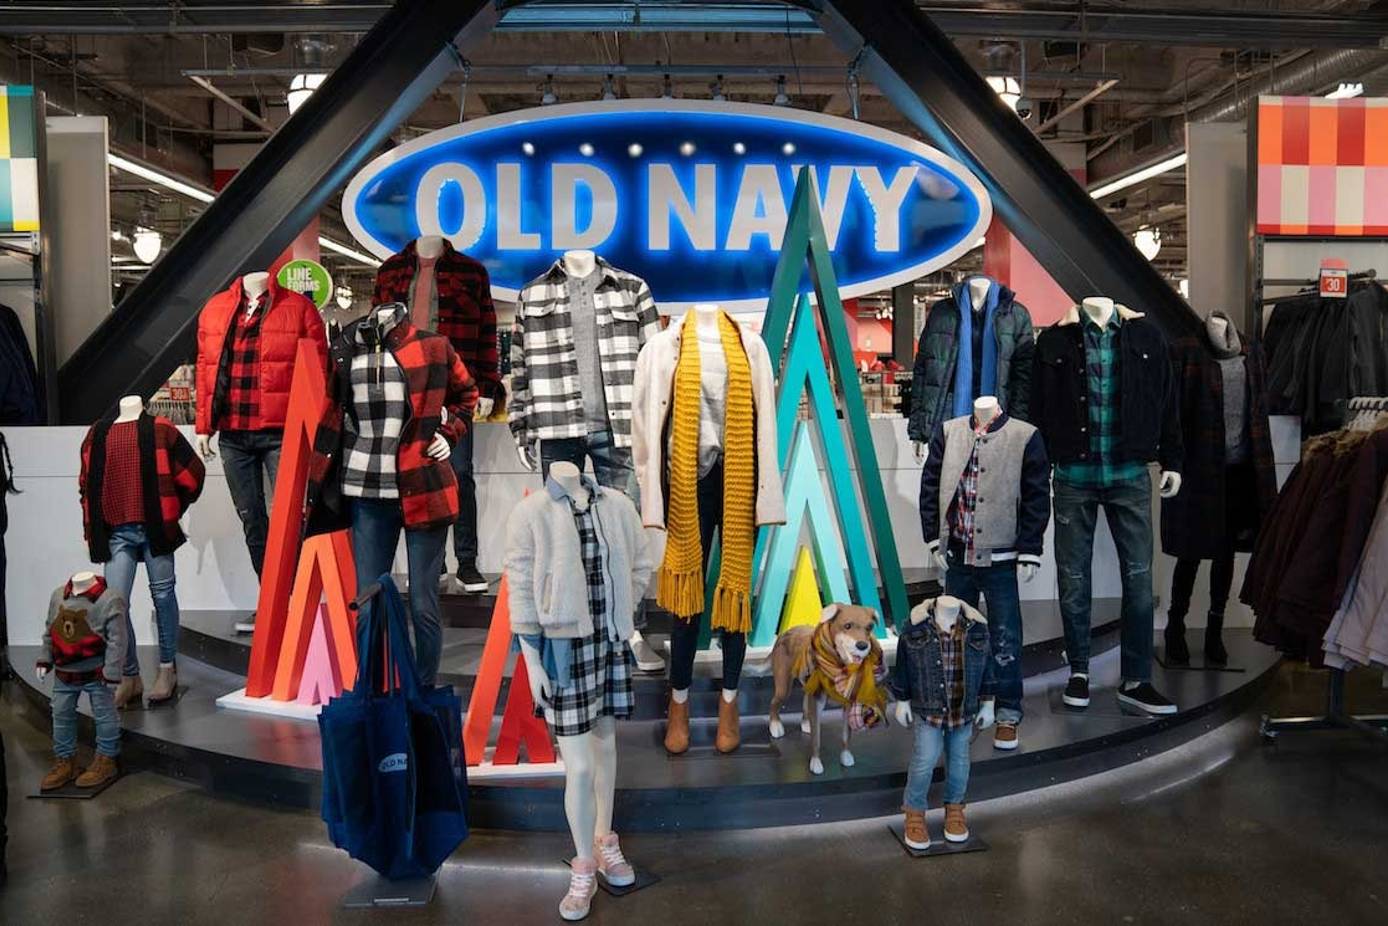 Gap won't spinoff Old Navy brand citing 'cost and complexity